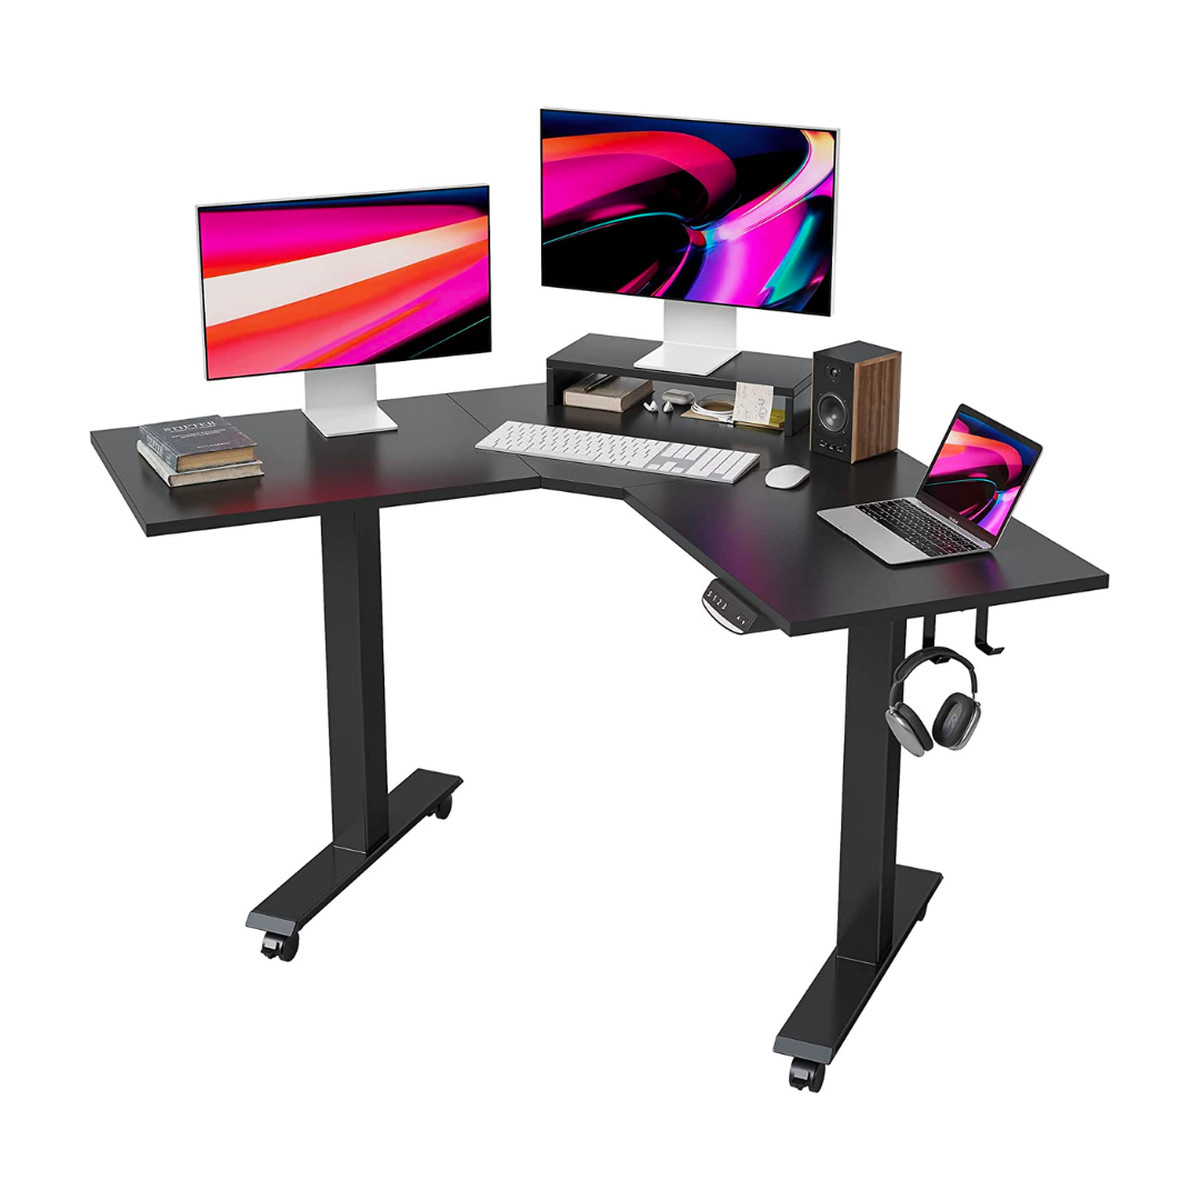 FEZIBO L-shaped electric standing desk with two storage hooks on the right side